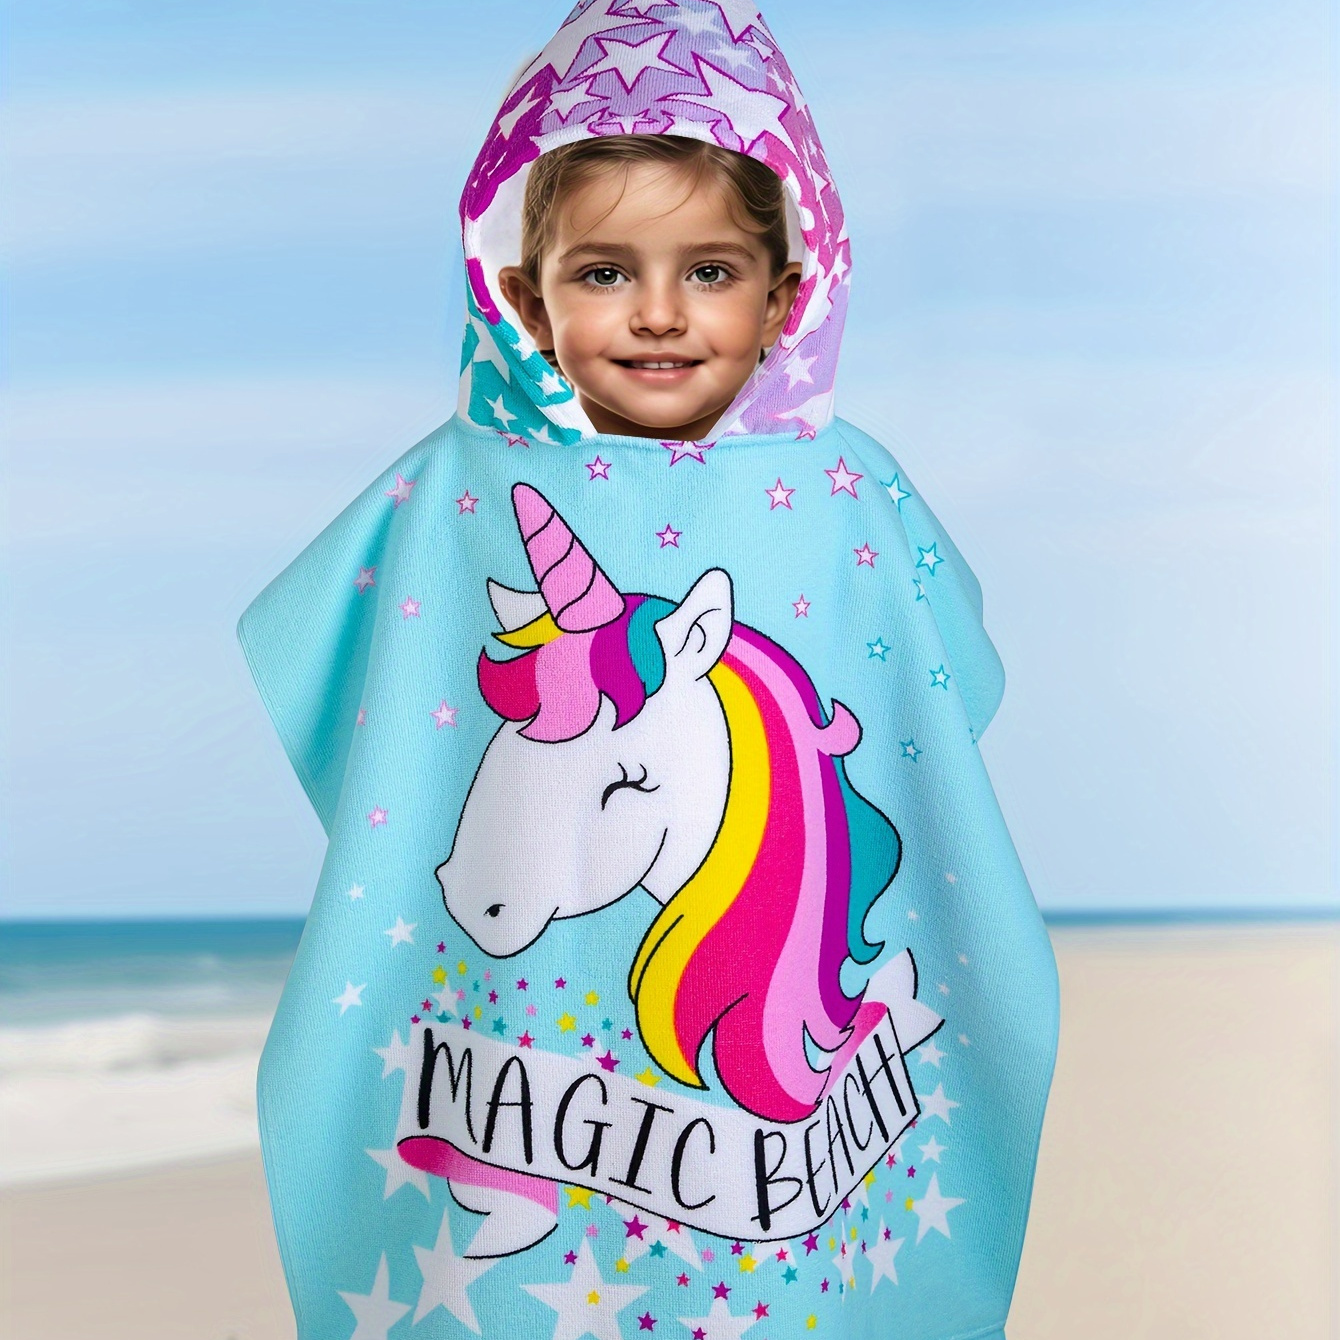 

Kids Hooded Beach Towel For Ages 1-10, Design Quick-dry Absorbent Poncho, Portable Travel Bathrobe, Sun Protection, Perfect For Beach & Park Playtime, Ideal Gift For Toddlers And Children